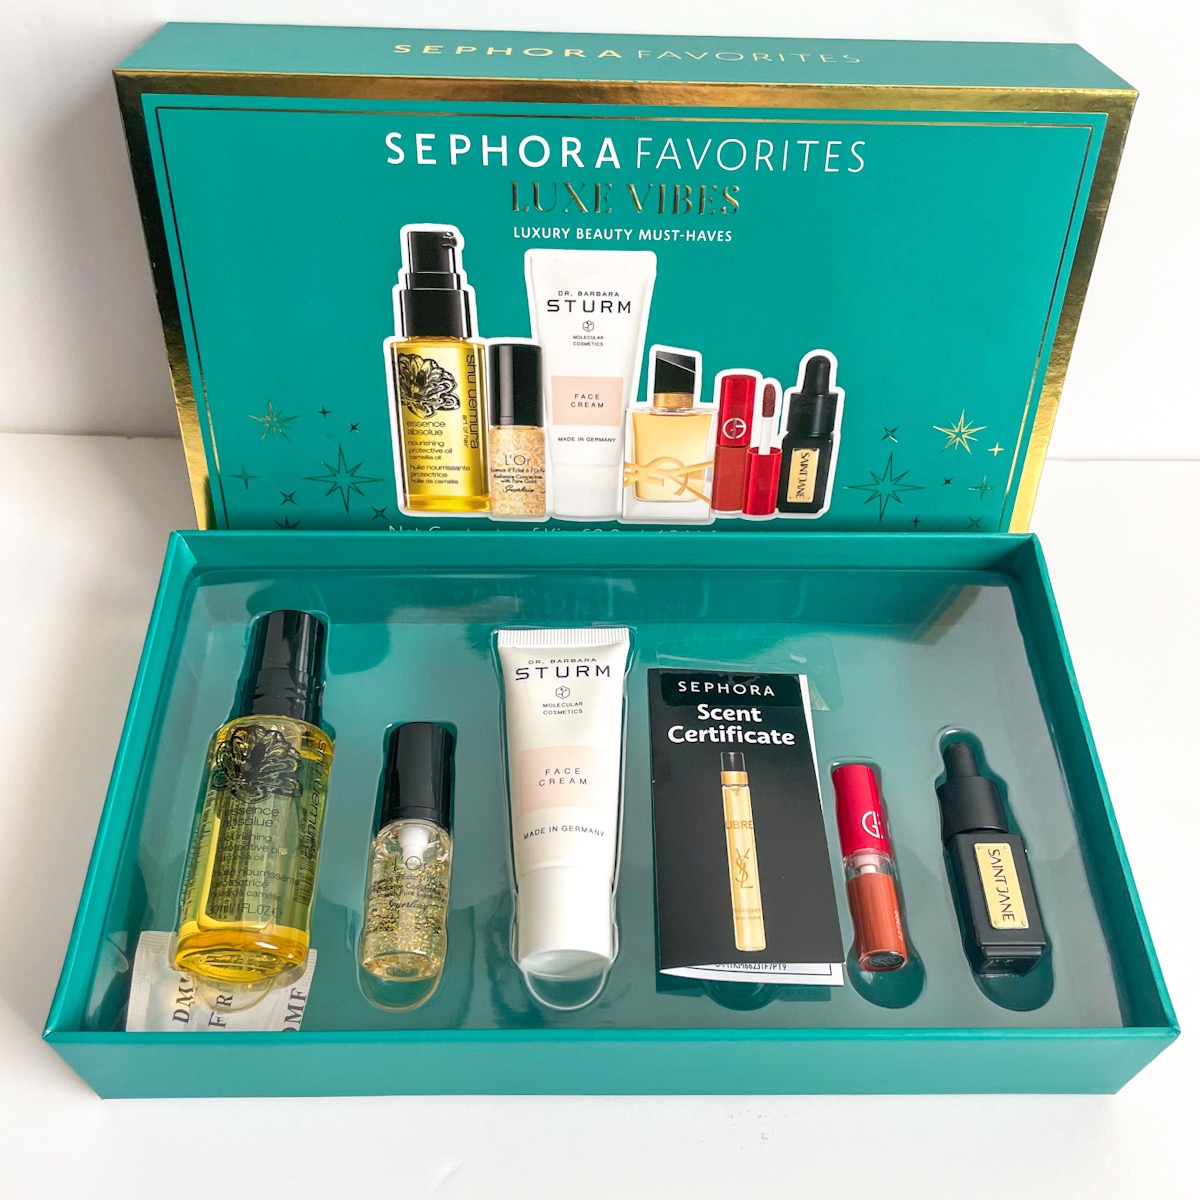 NEW Sephora Favorites Beauty Sets Just $28 Shipped (Up to $83